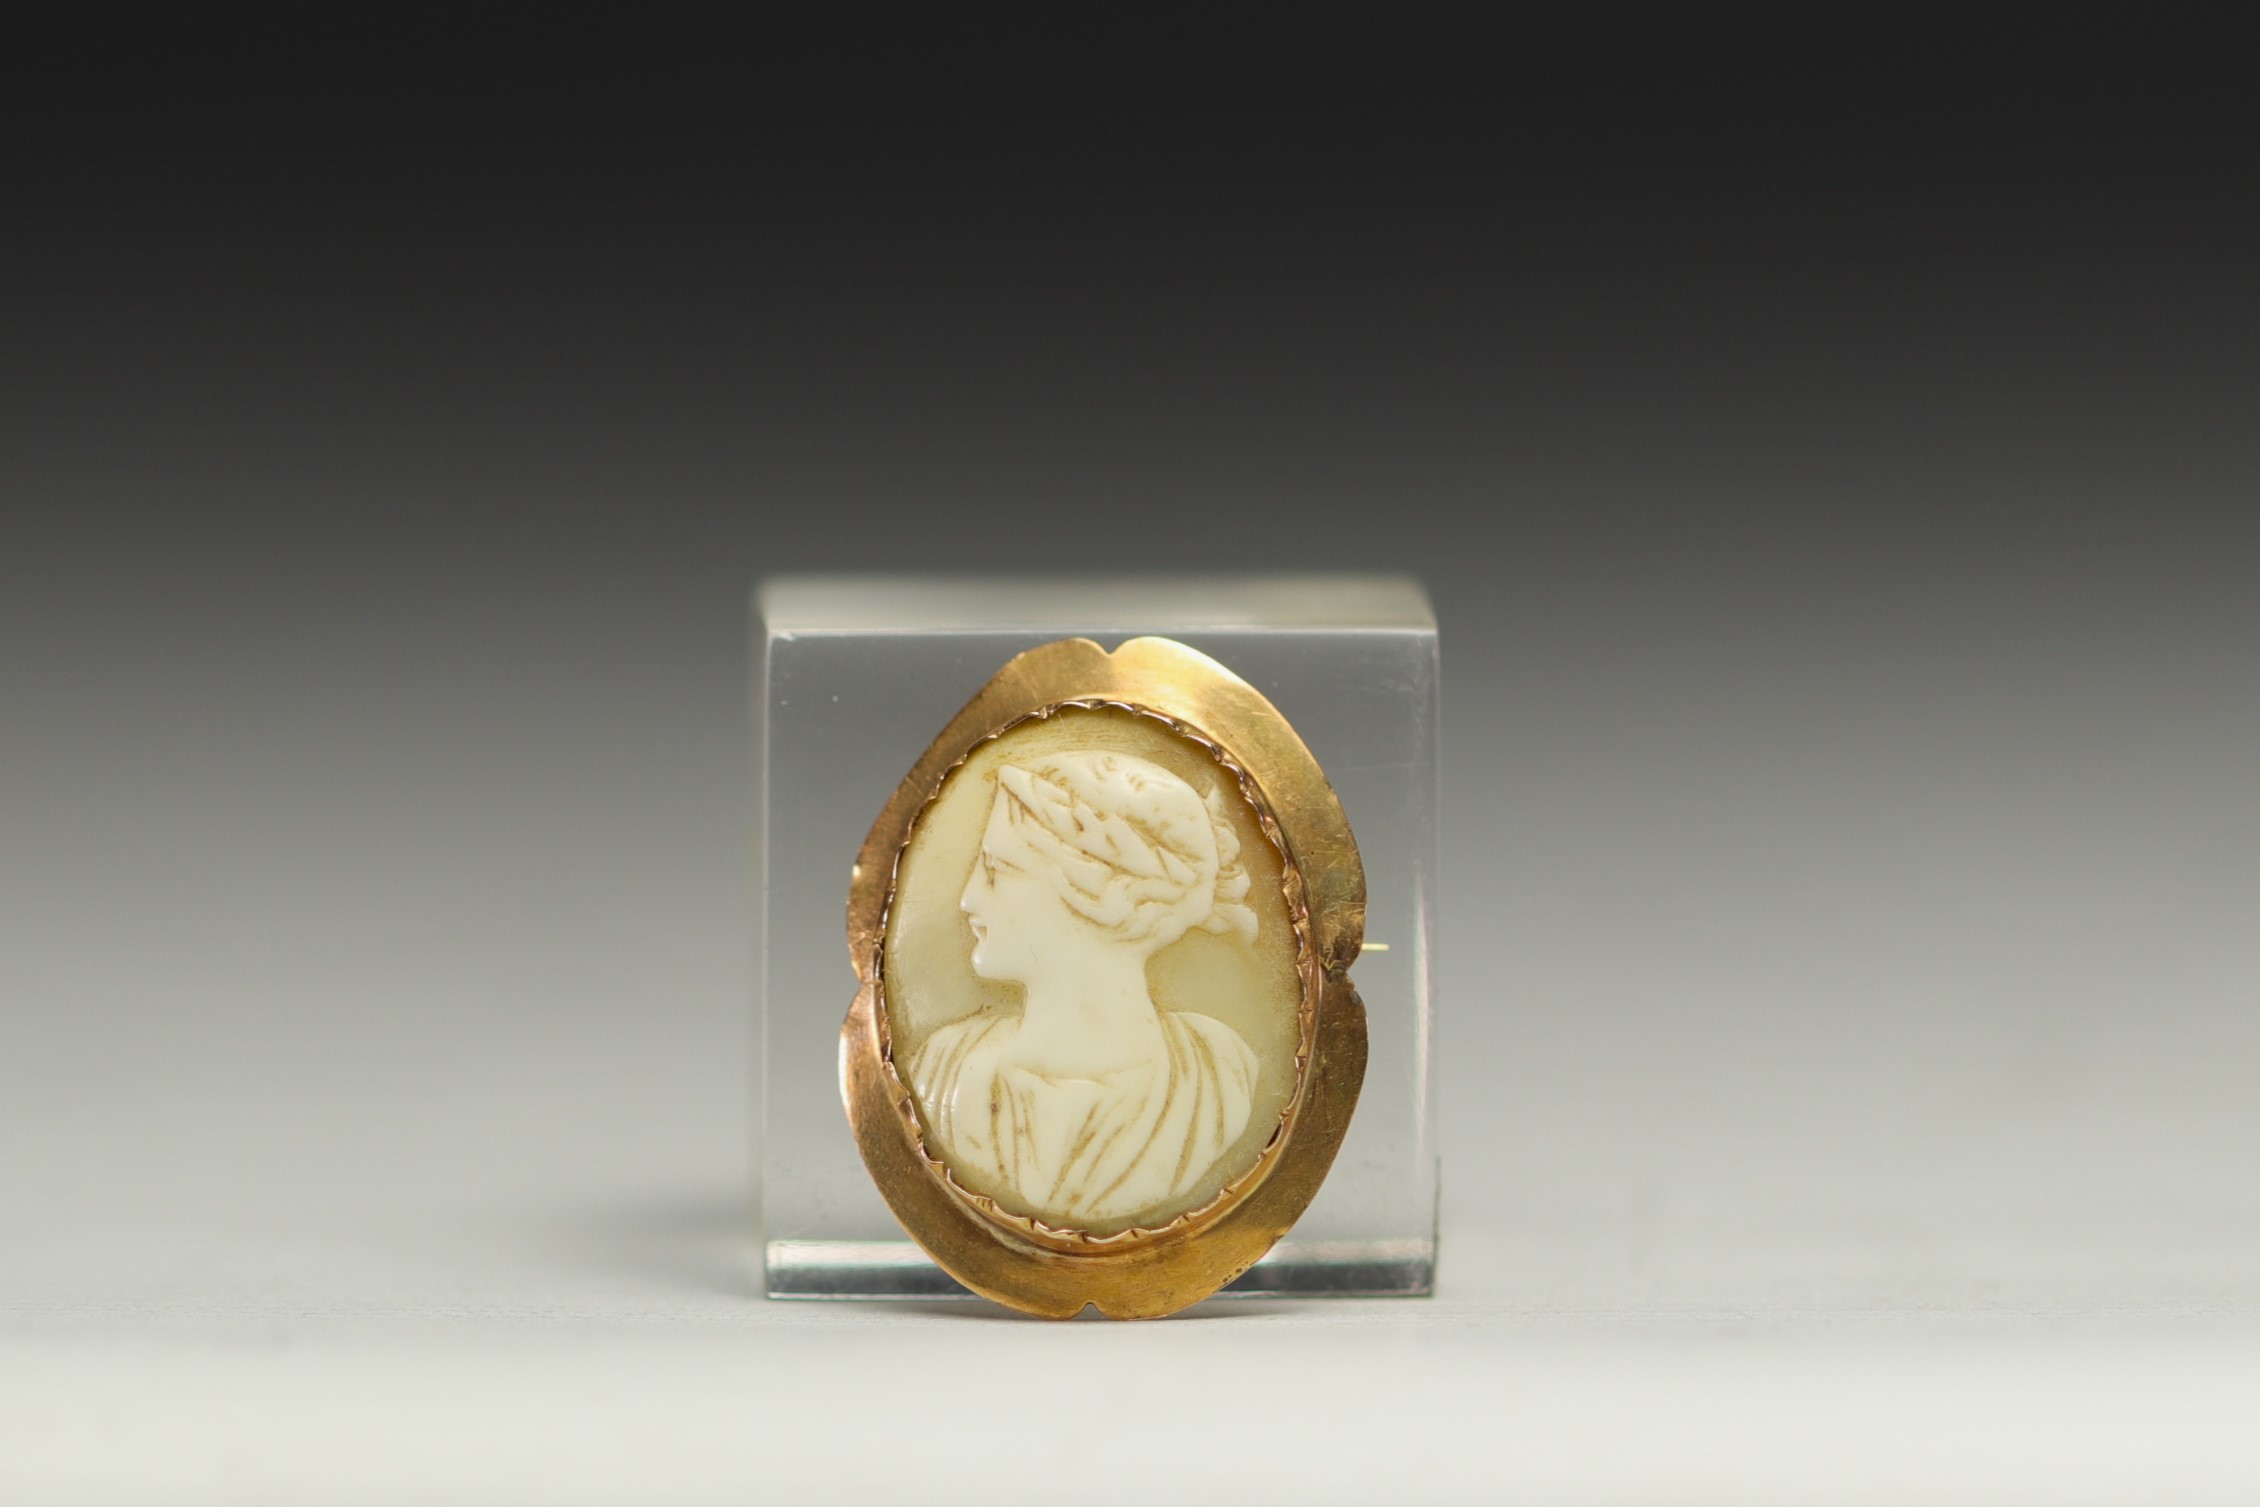 Small 14k gold "Woman a l'antique" cameo brooch